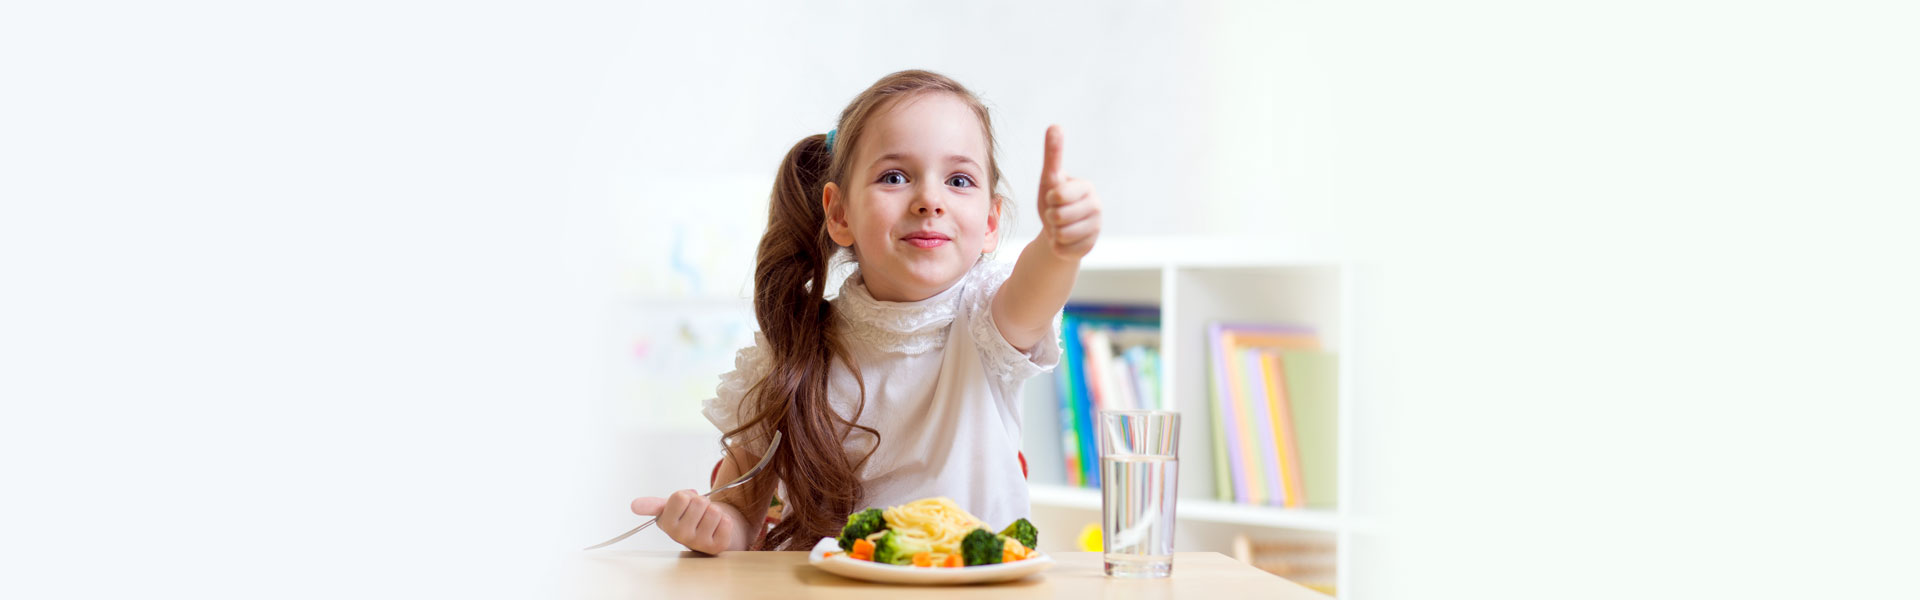 4 Excellent Reasons Why You Should Hire a Food Catering Service to Provide Your Child’s School Meals